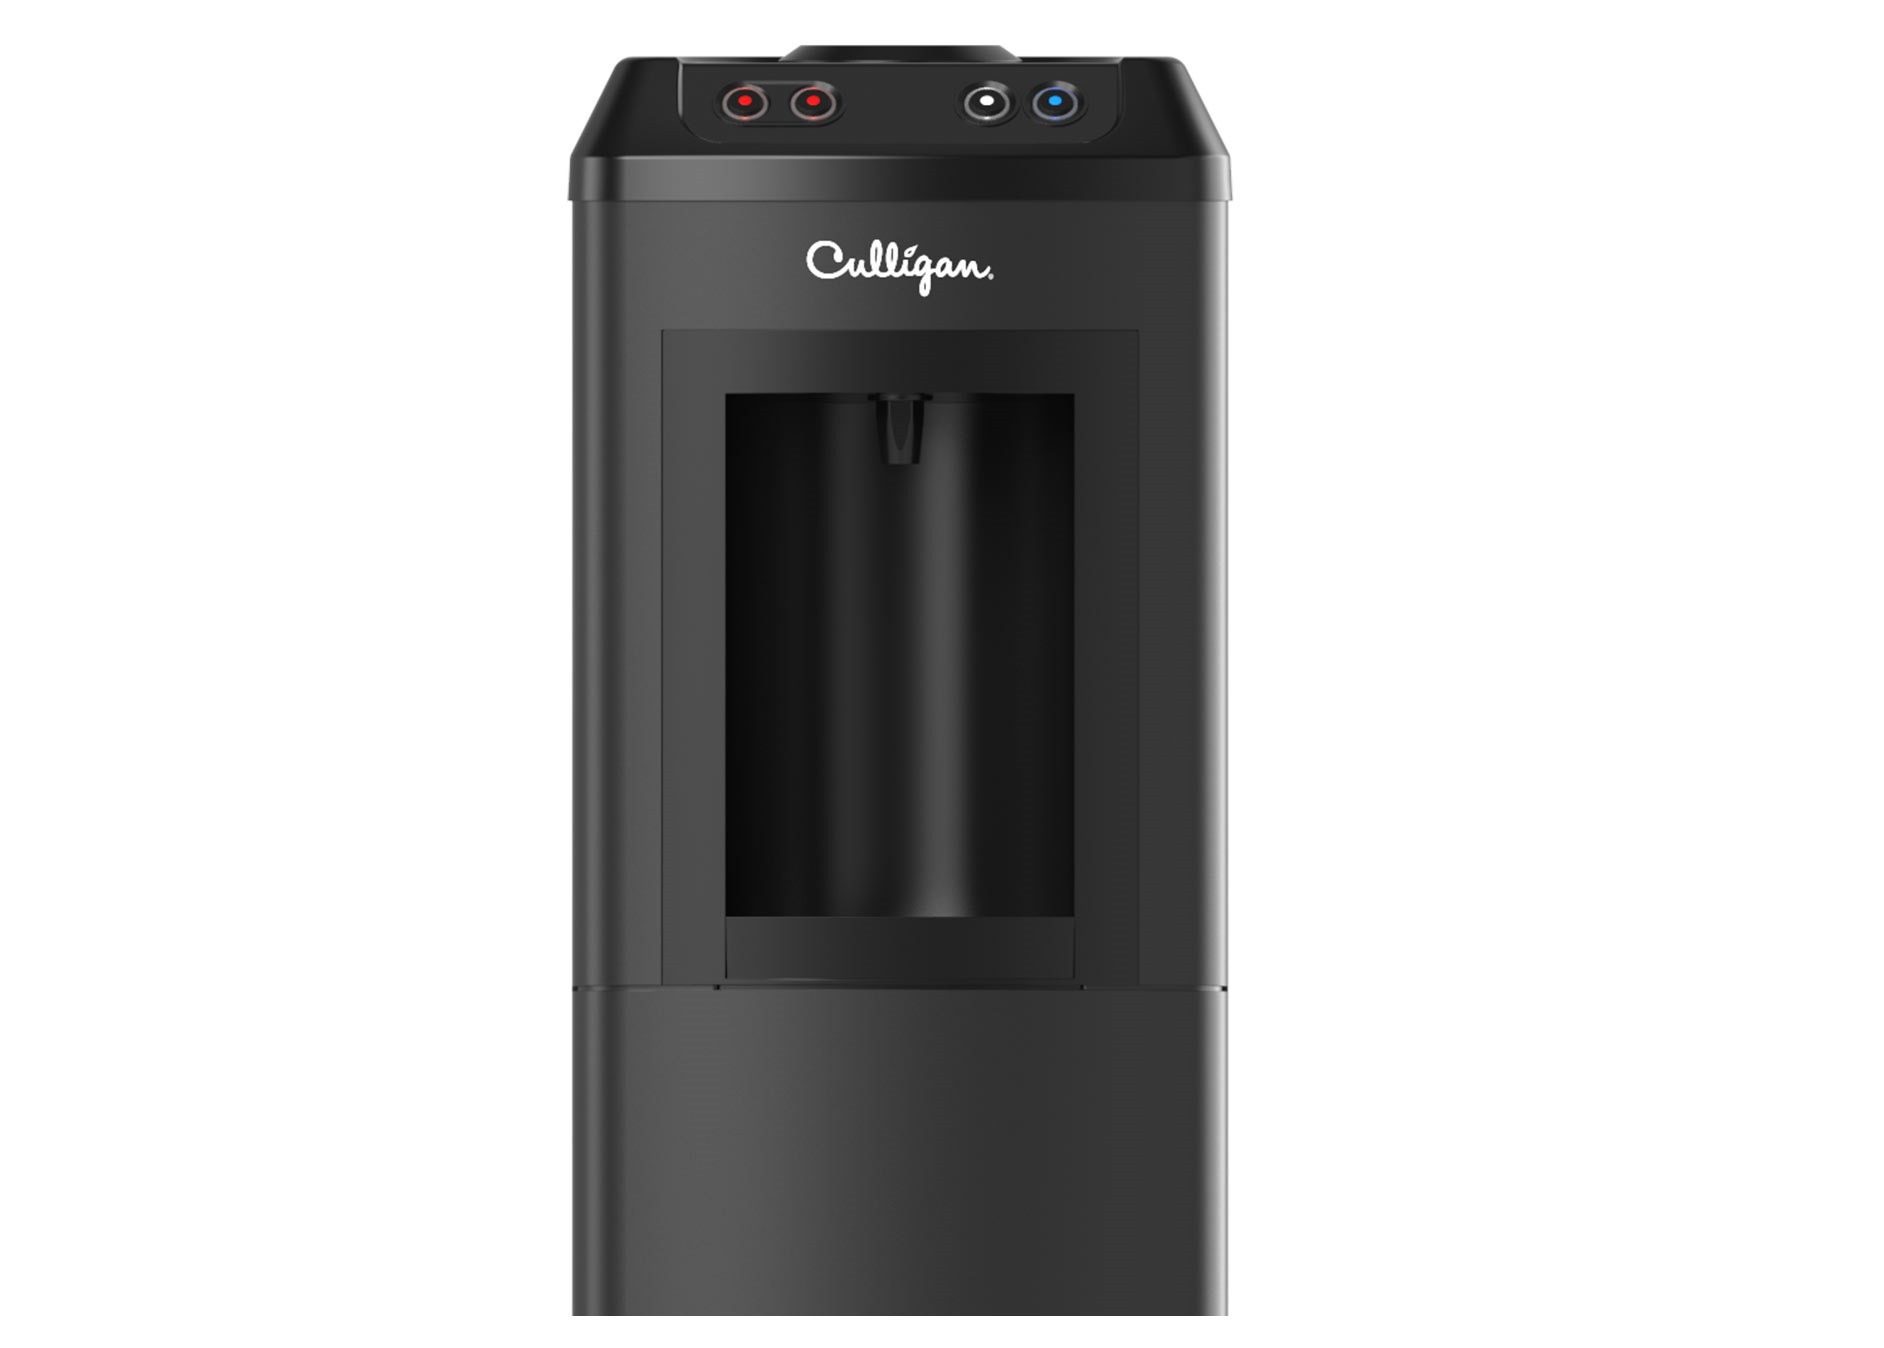 How Much Does A Culligan Water Dispenser Cost